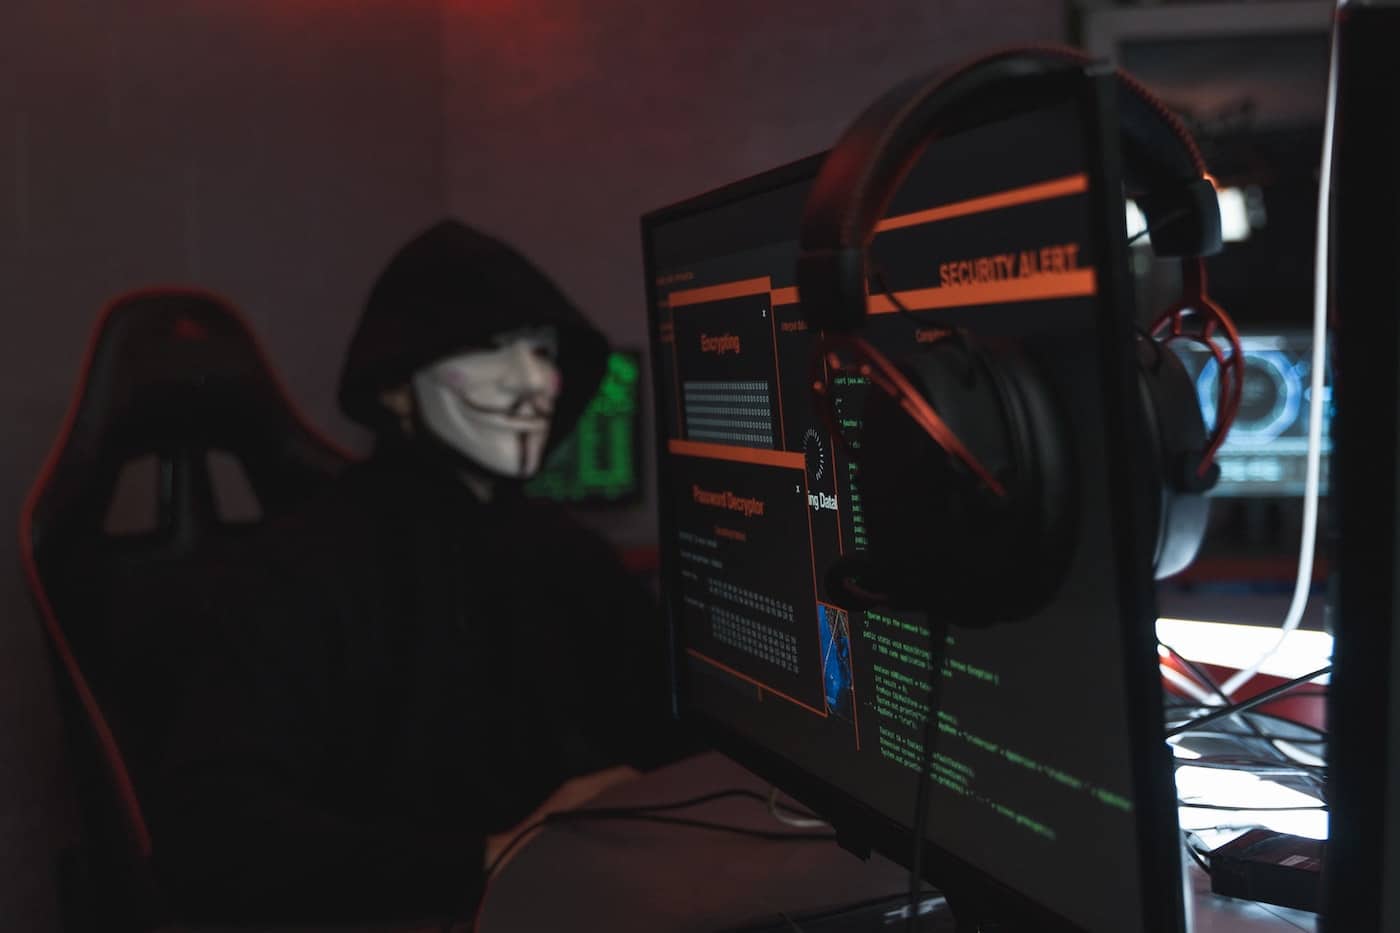 Image of hacker wearing a mask sitting behind a computer. Meant to symbolize social engineering attacks.